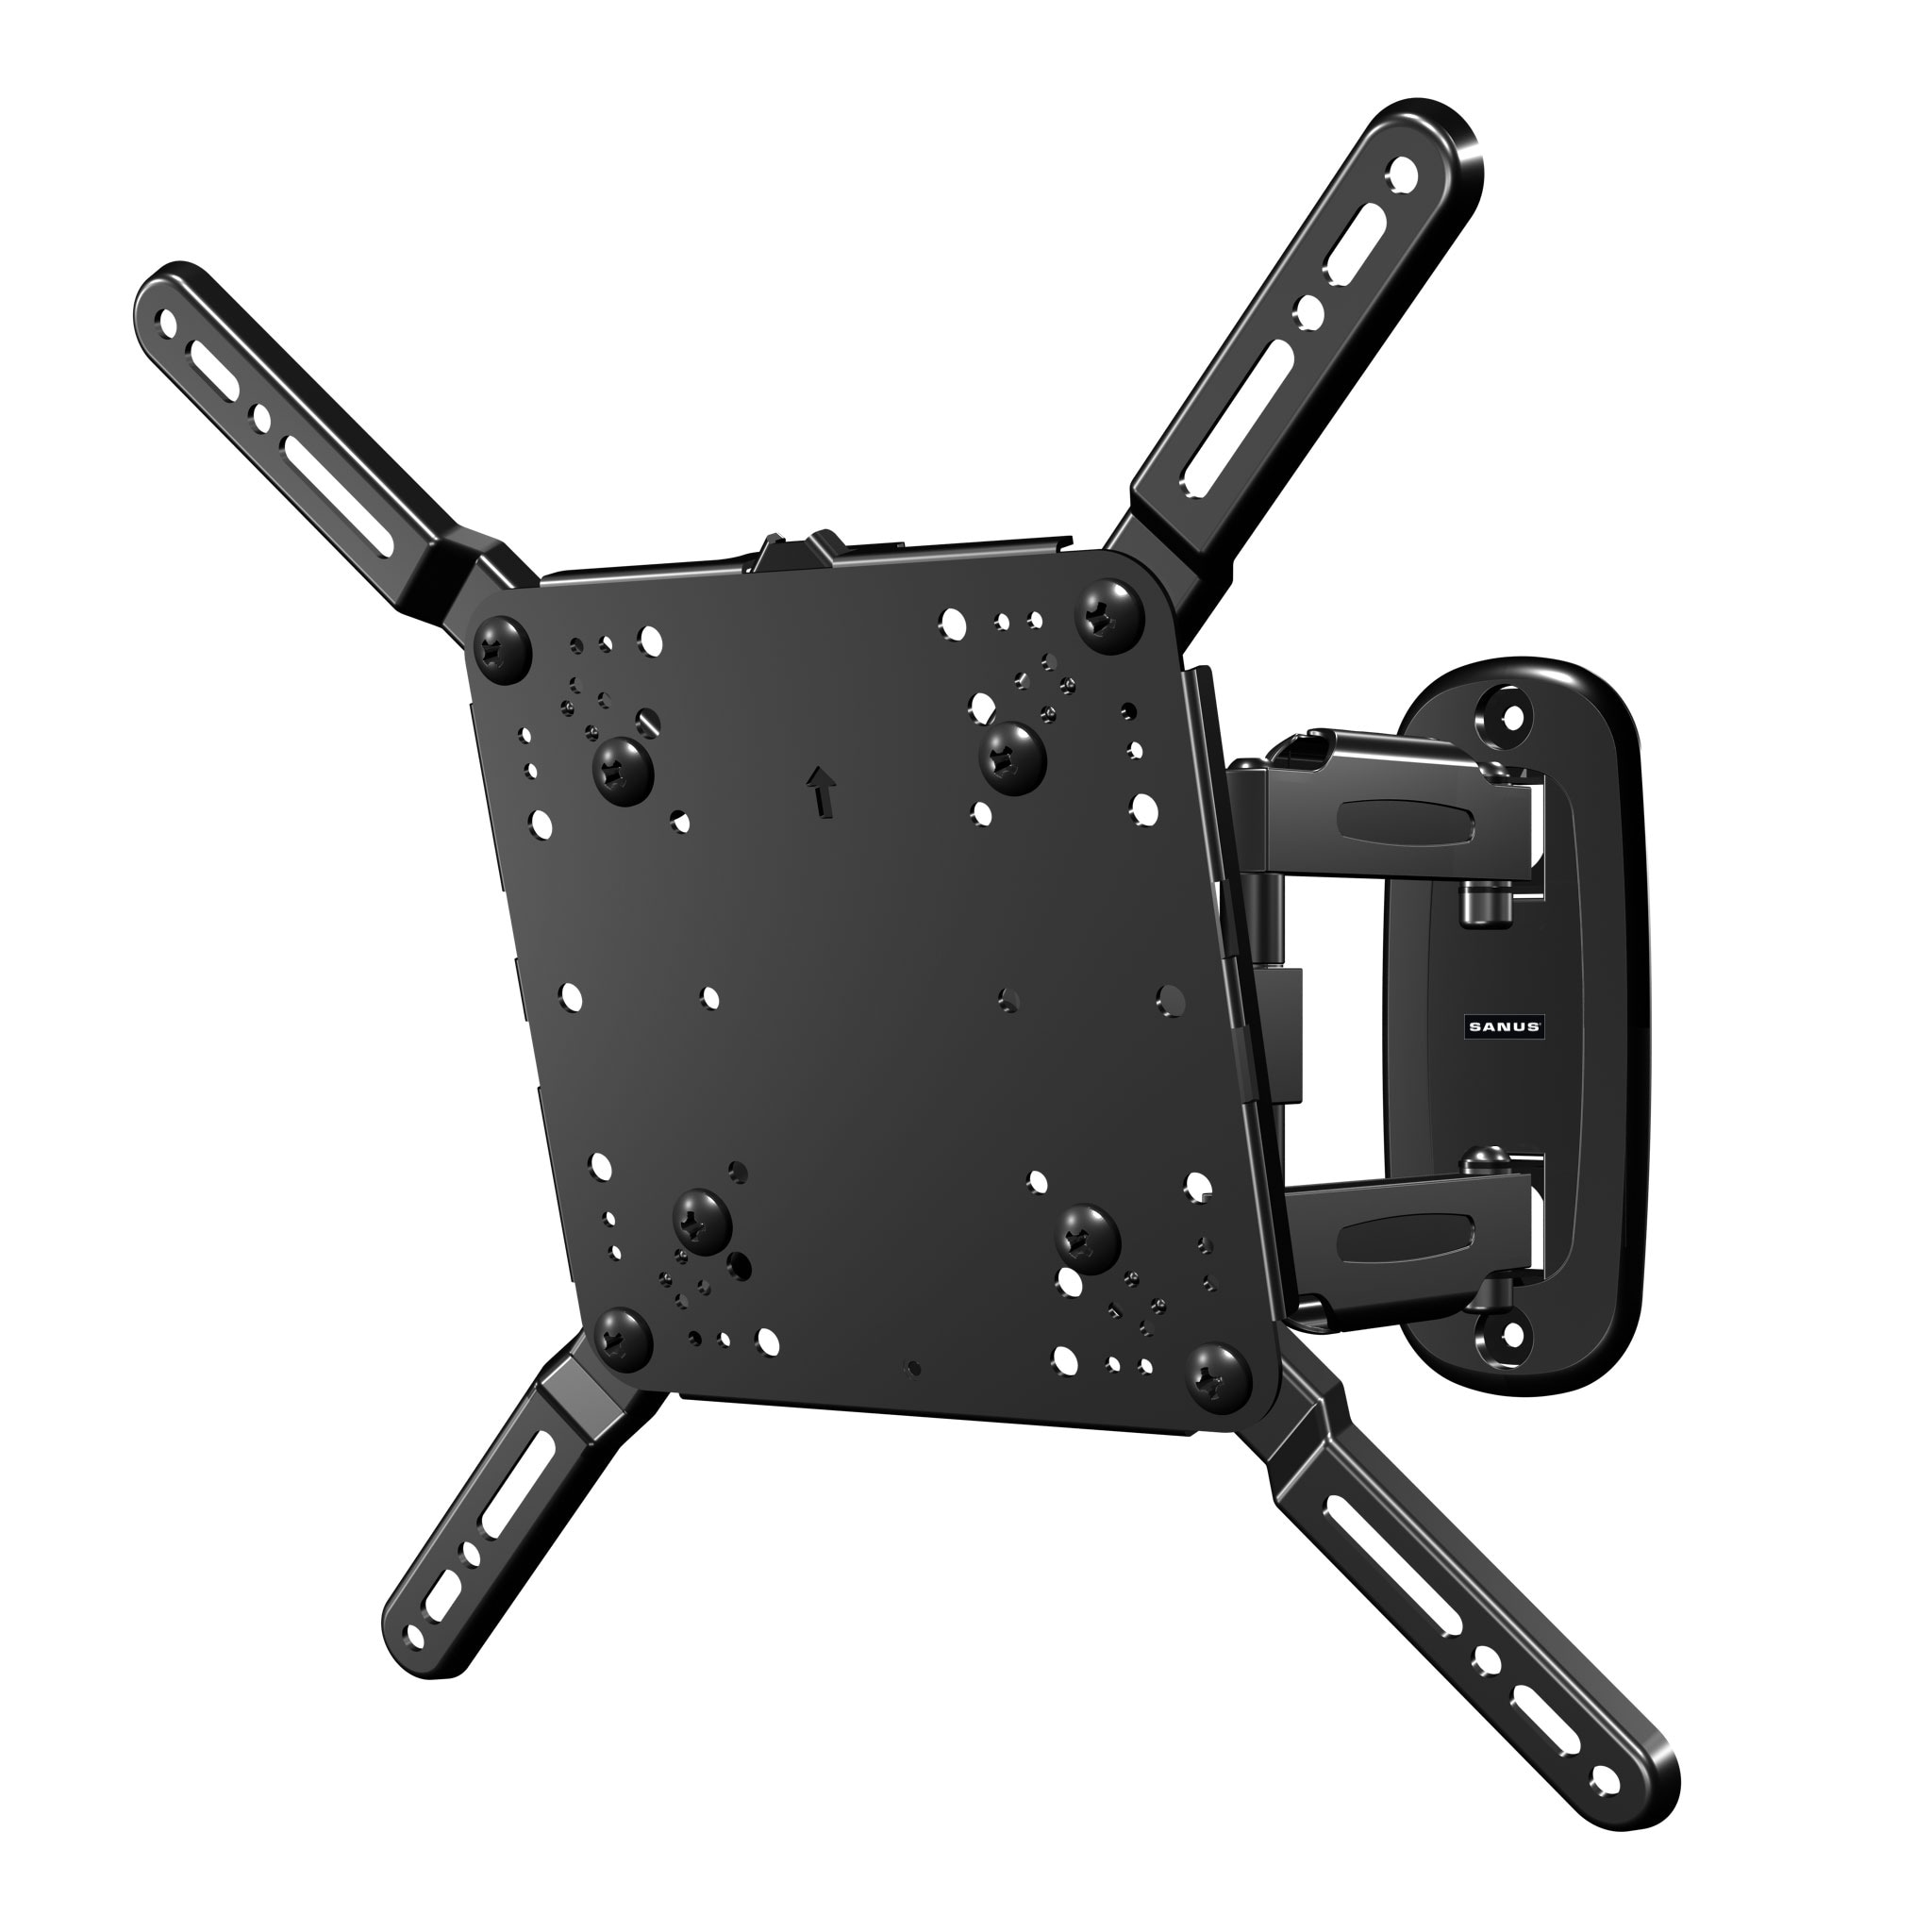 32 to 55-in Full Motion Indoor Wall TV Mount Fits TVs up to 55-in (Hardware Included) in Black | - Sanus LMF115-B1